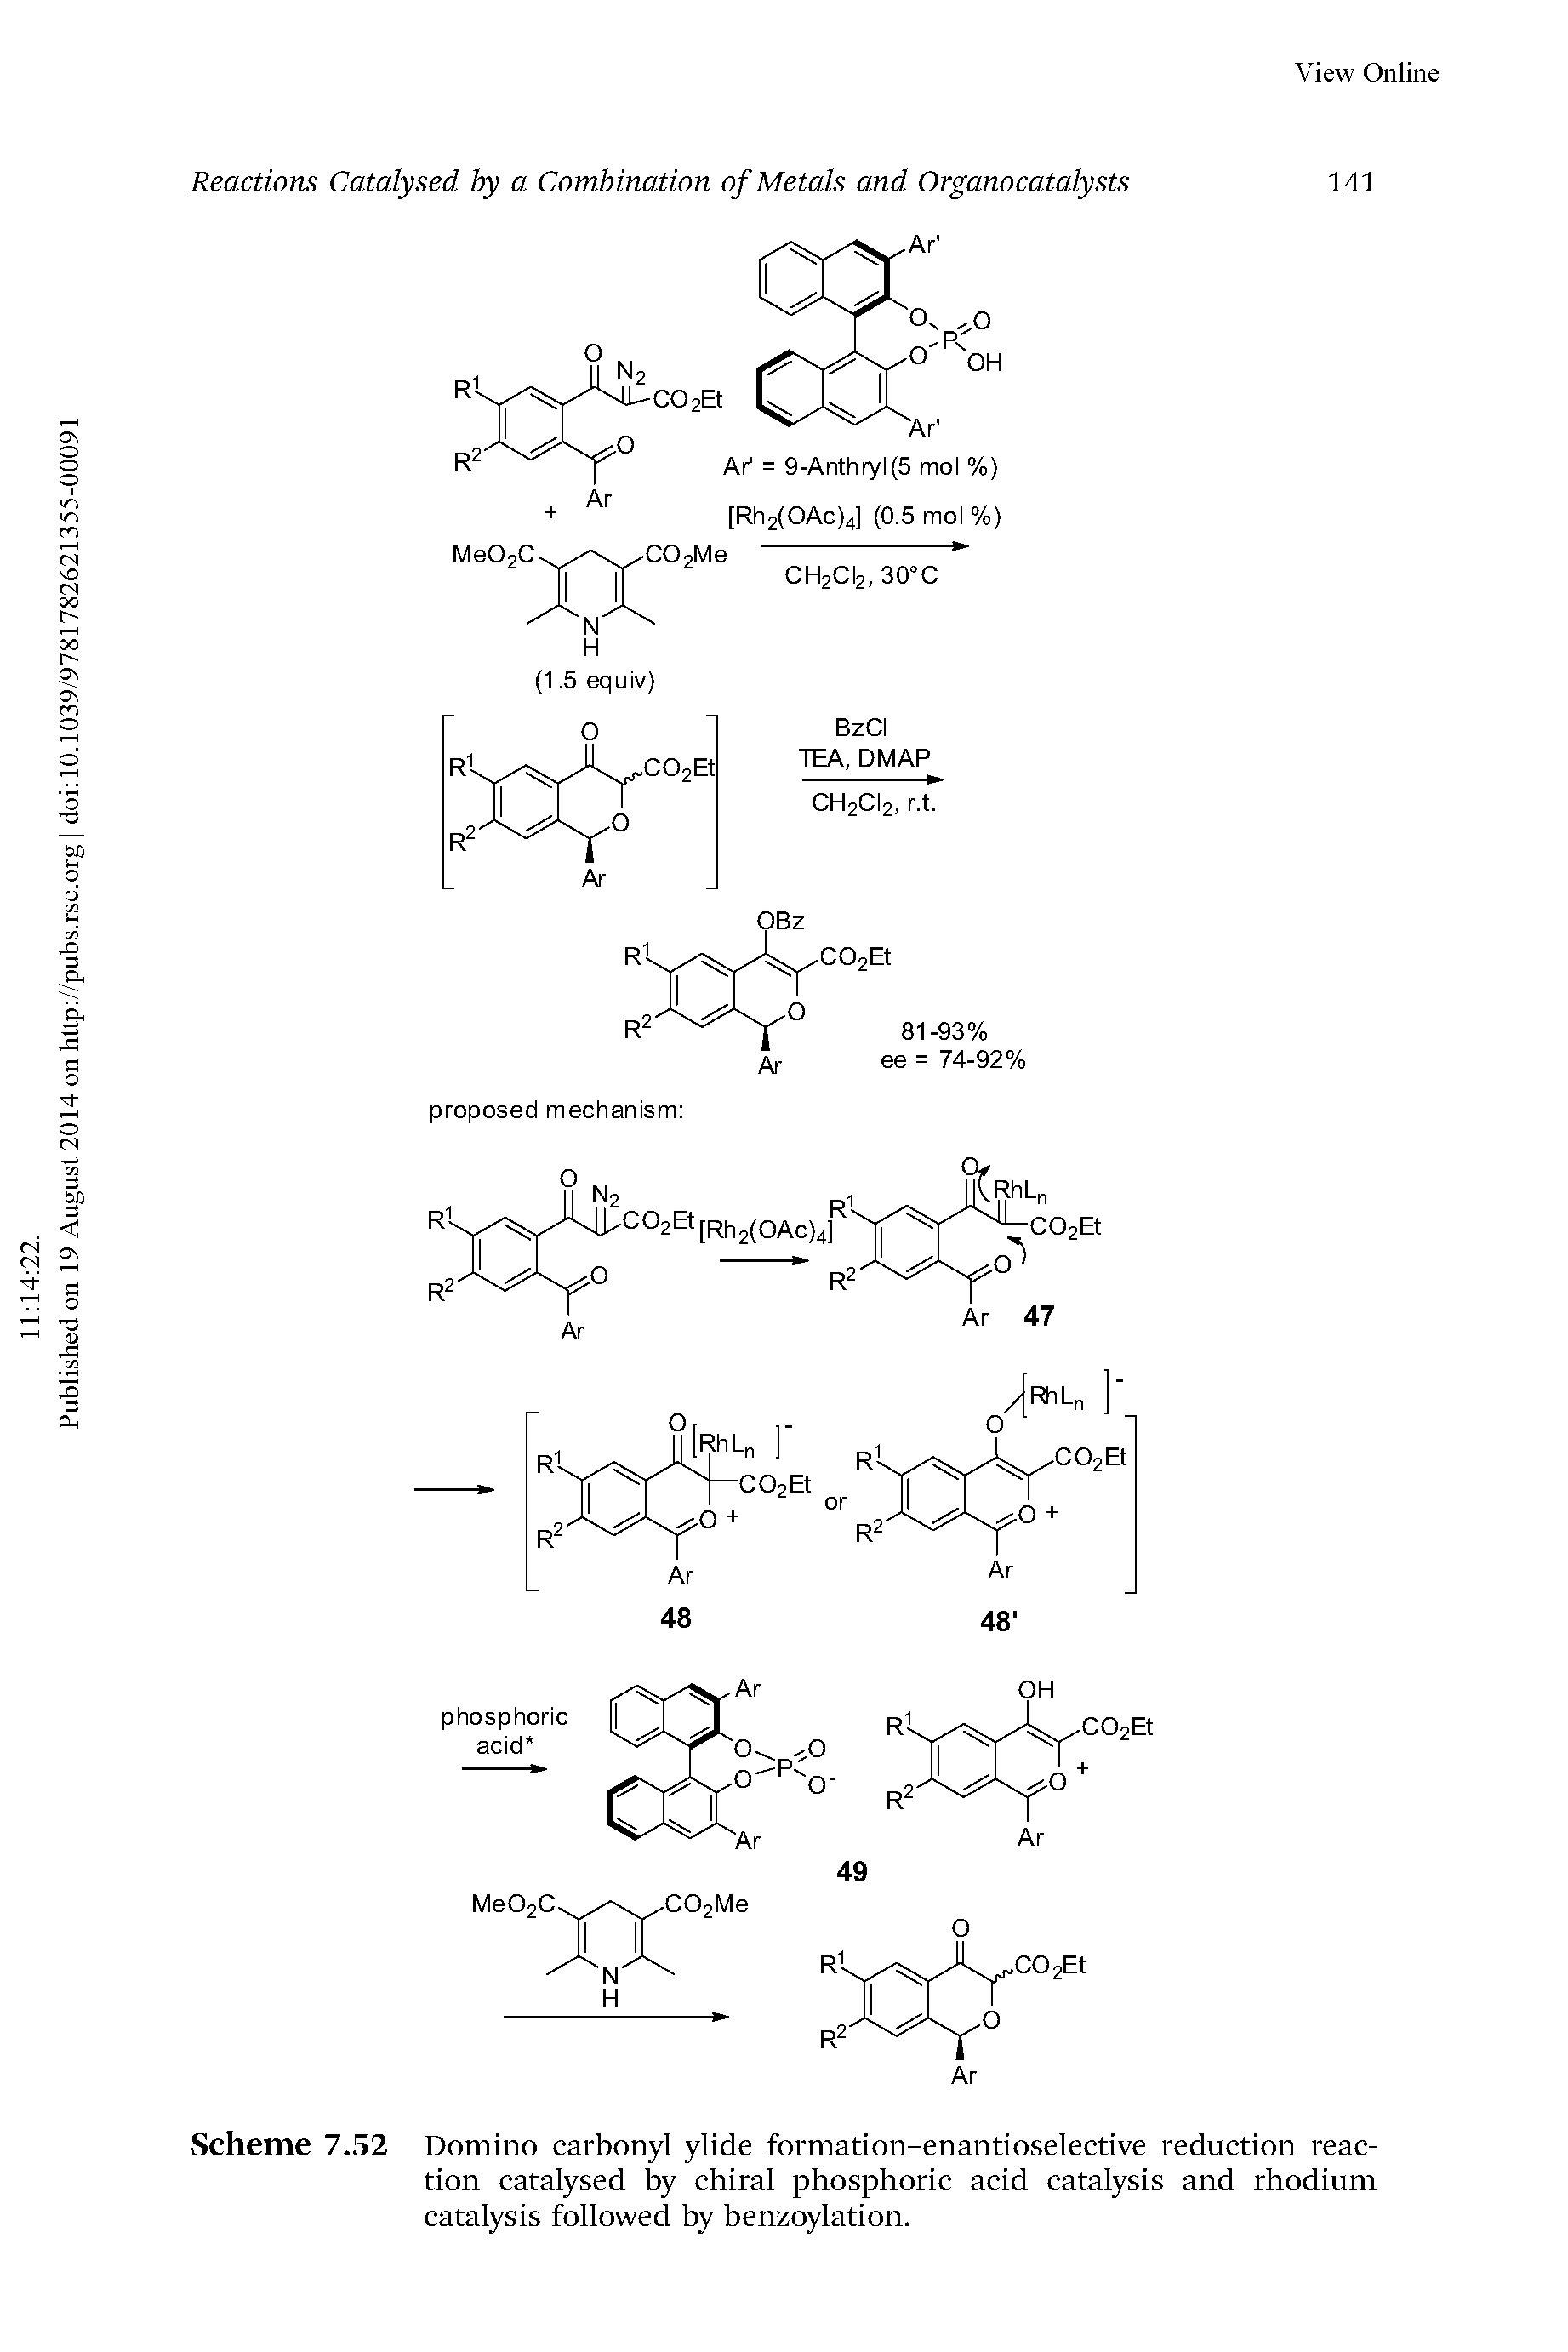 Scheme 7.52 Domino carbonyl ylide formation-enantioselective reduction reaction catalysed by chiral phosphoric acid catalysis and rhodium catalysis followed by benzoylation.